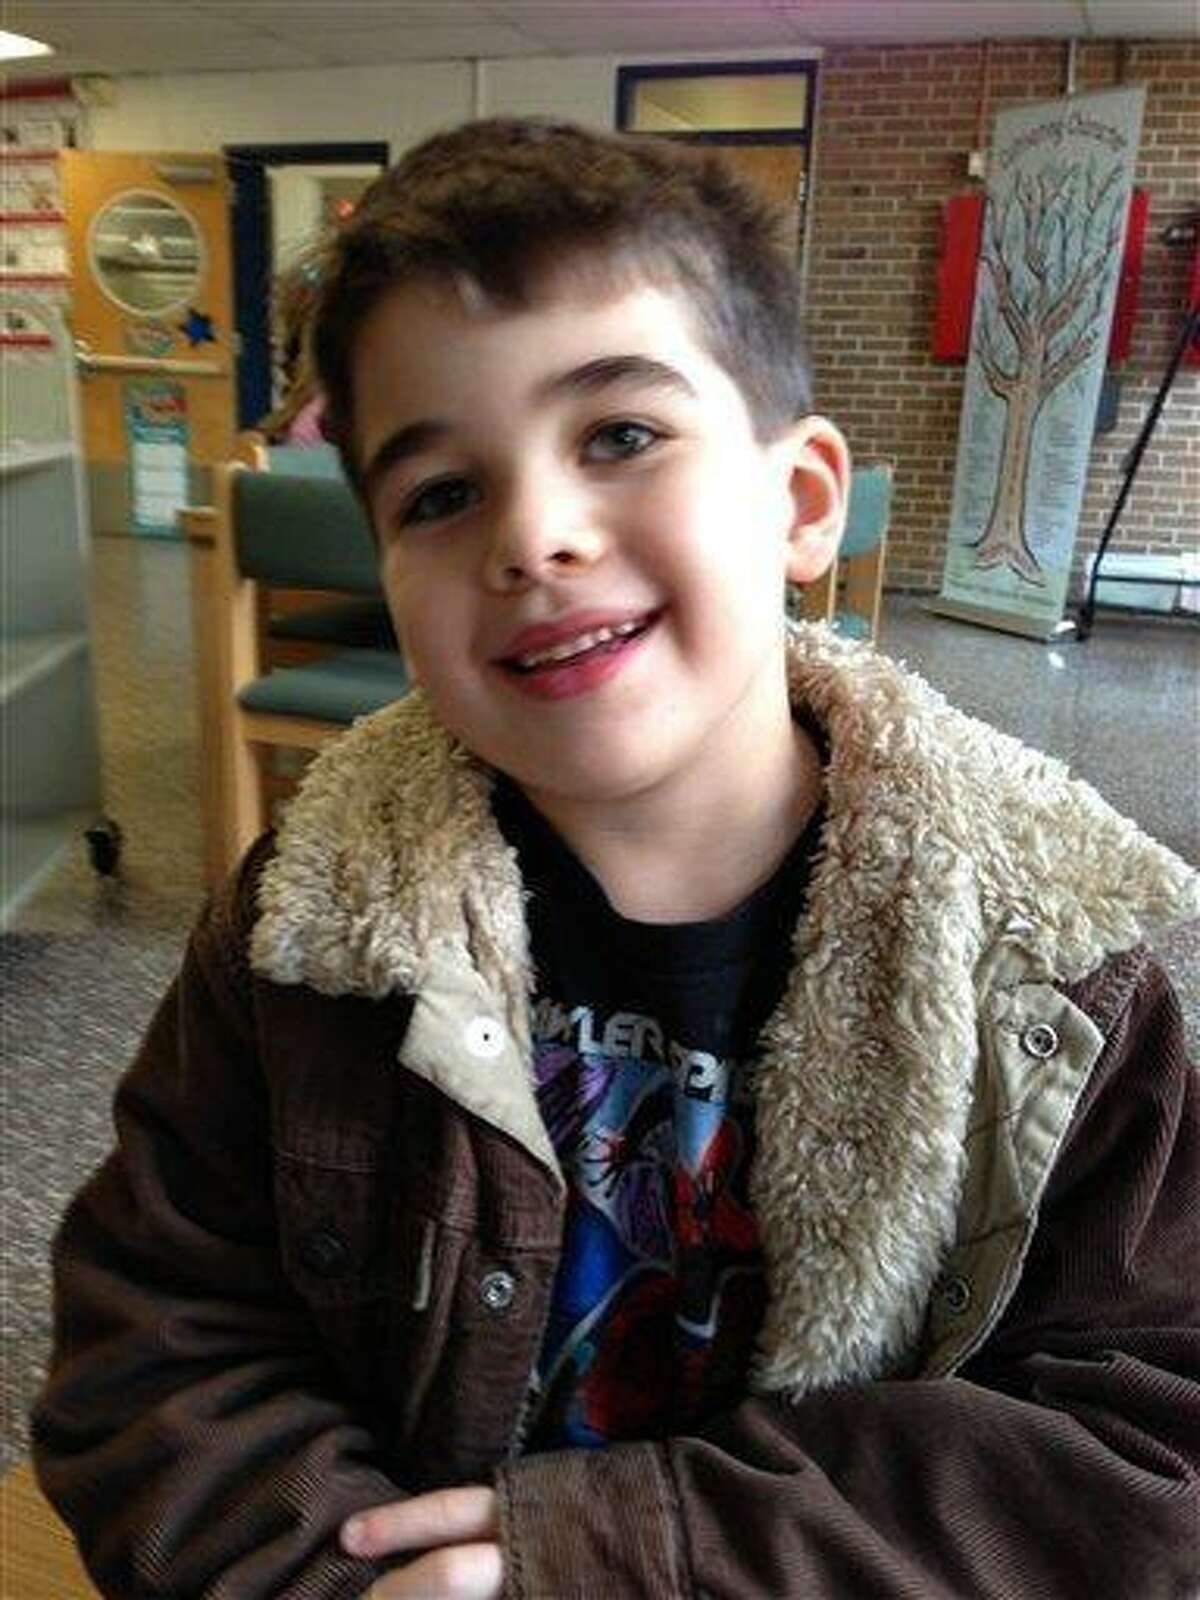 This Nov. 13, 2012 photo provided by the family via The Washington Post shows Noah Pozner. The six-year-old was one of the victims in the Sandy Hook elementary school shooting in Newtown, Conn. on Dec. 14, 2012. (AP Photo/Family Photo)